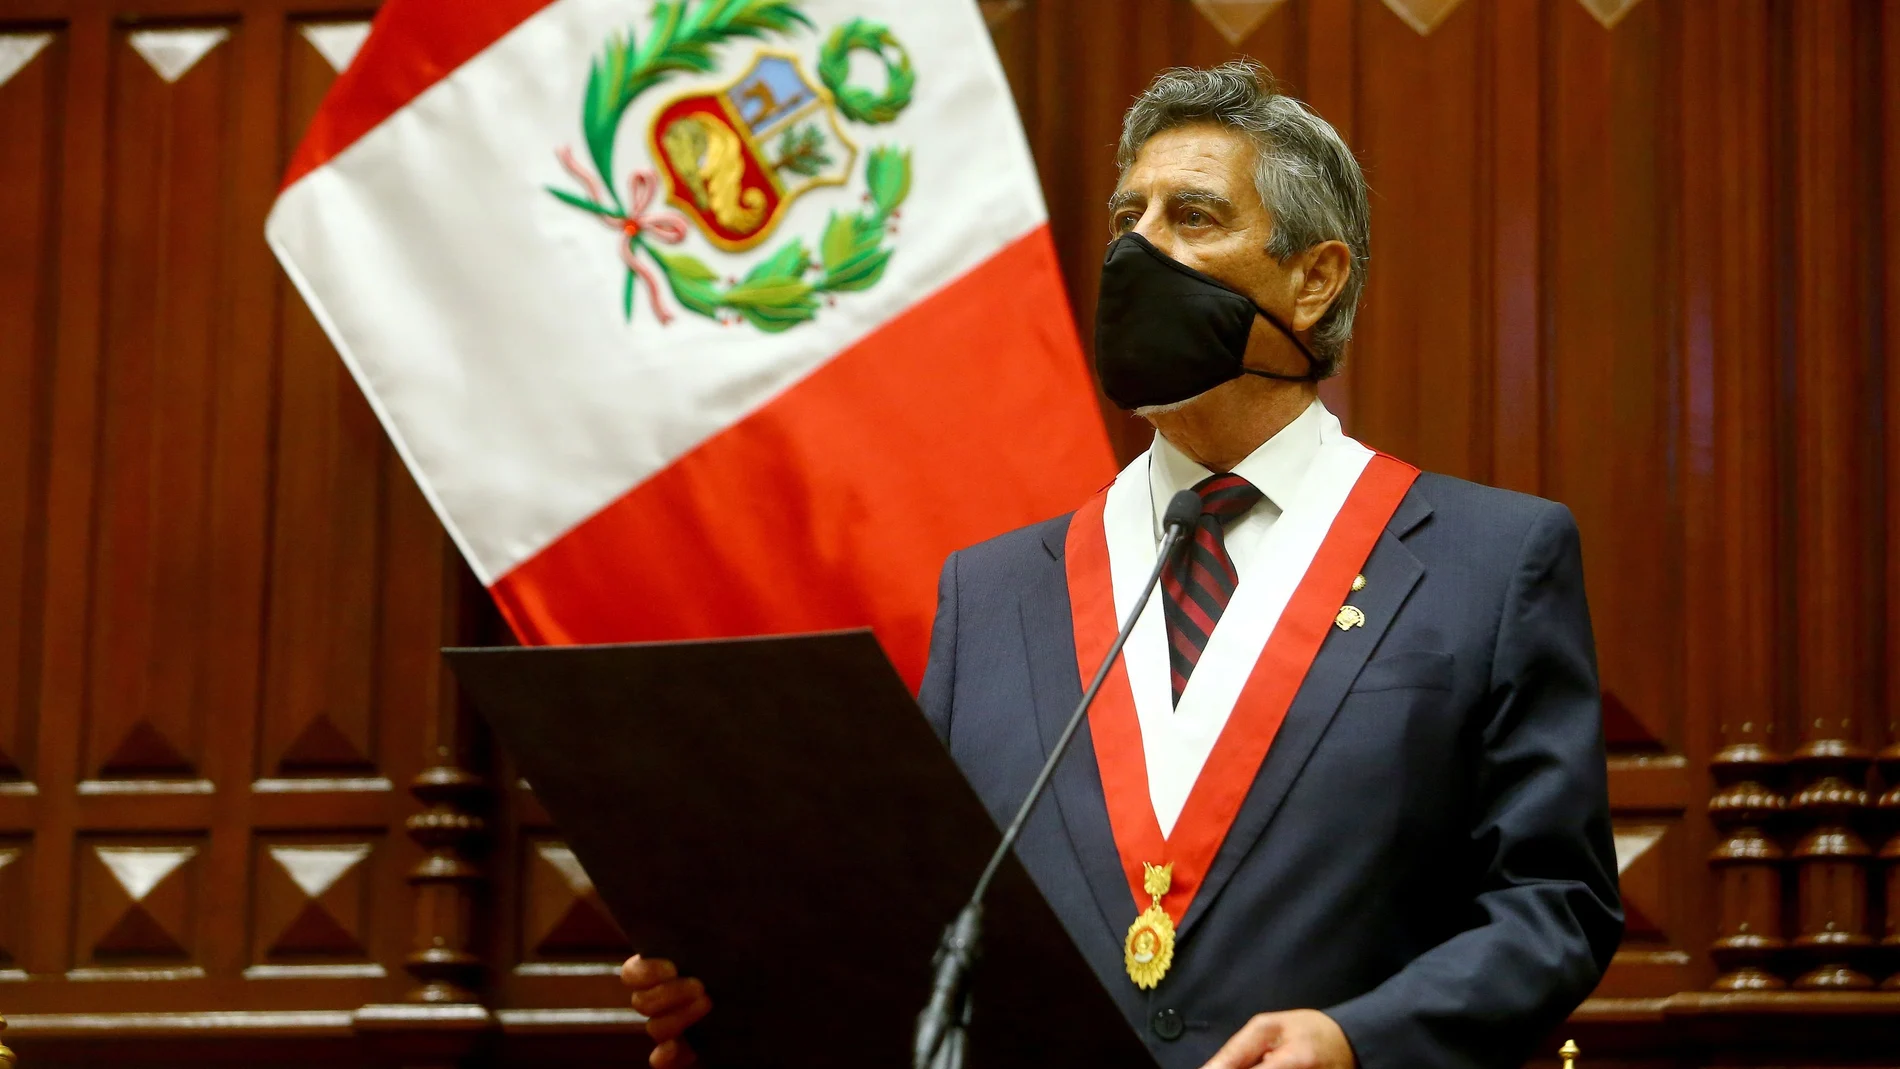 Peru's selected interim leader Francisco Sagasti attends his swearing-in ceremony, in Lima, Peru, November 17, 2020. Luis Iparraguirre/Presidency/Handout via REUTERS ATTENTION EDITORS - THIS IMAGE WAS PROVIDED BY A THIRD PARTY. NO RESALES. NO ARCHIVE.